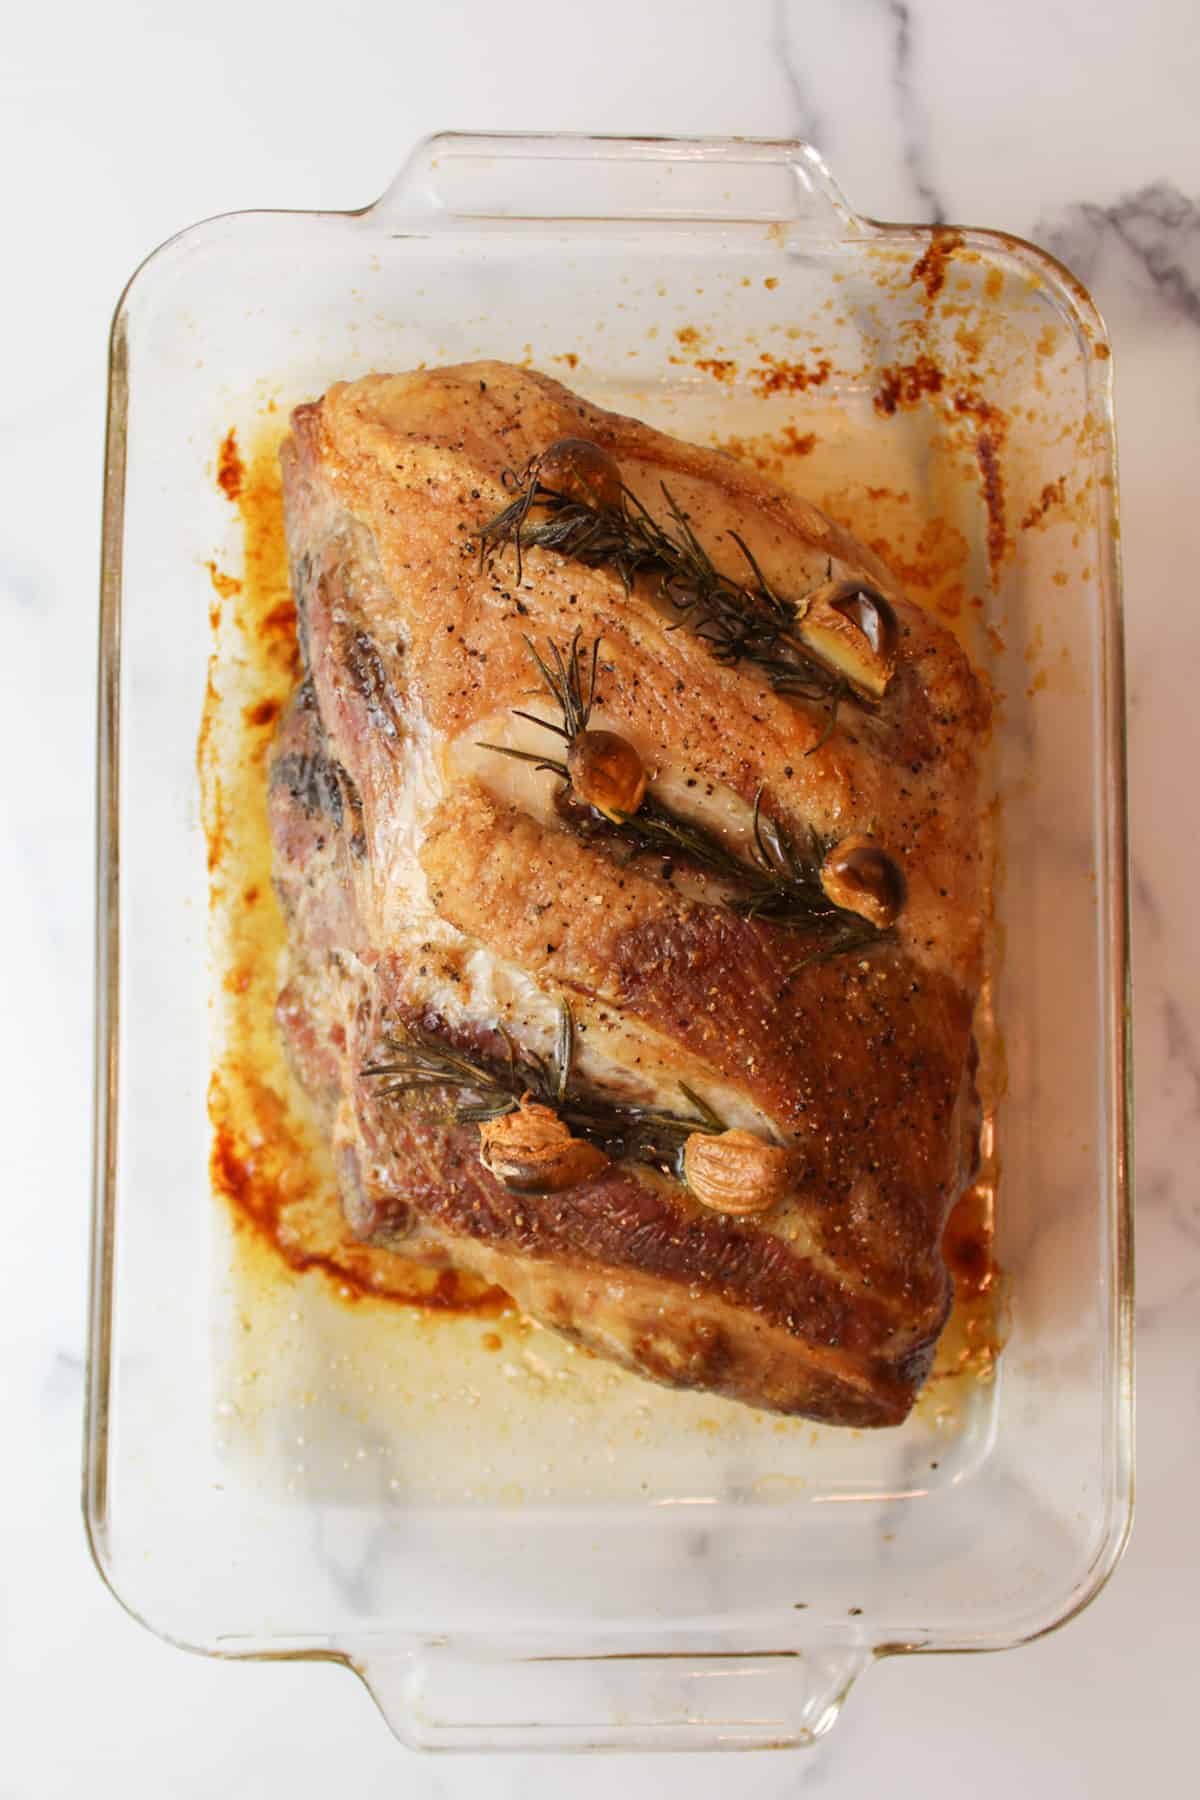 roasted pork shoulder with rosemary and garlic cloves in a glass 9x13 baking dish.